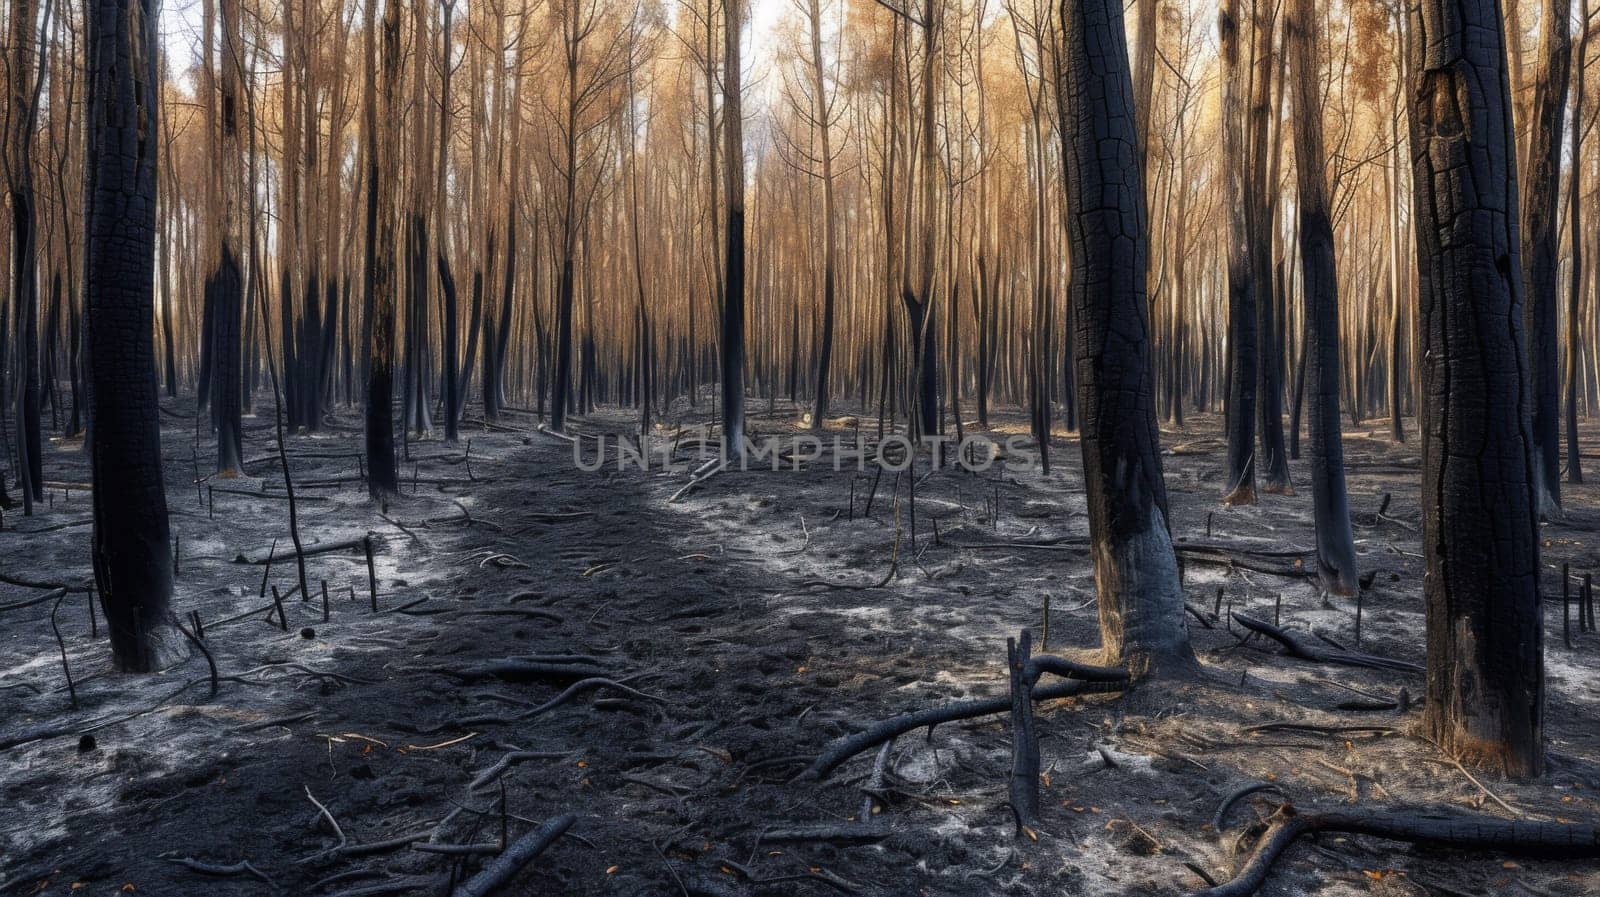 A forest with trees that have been burned and are bare, AI by starush